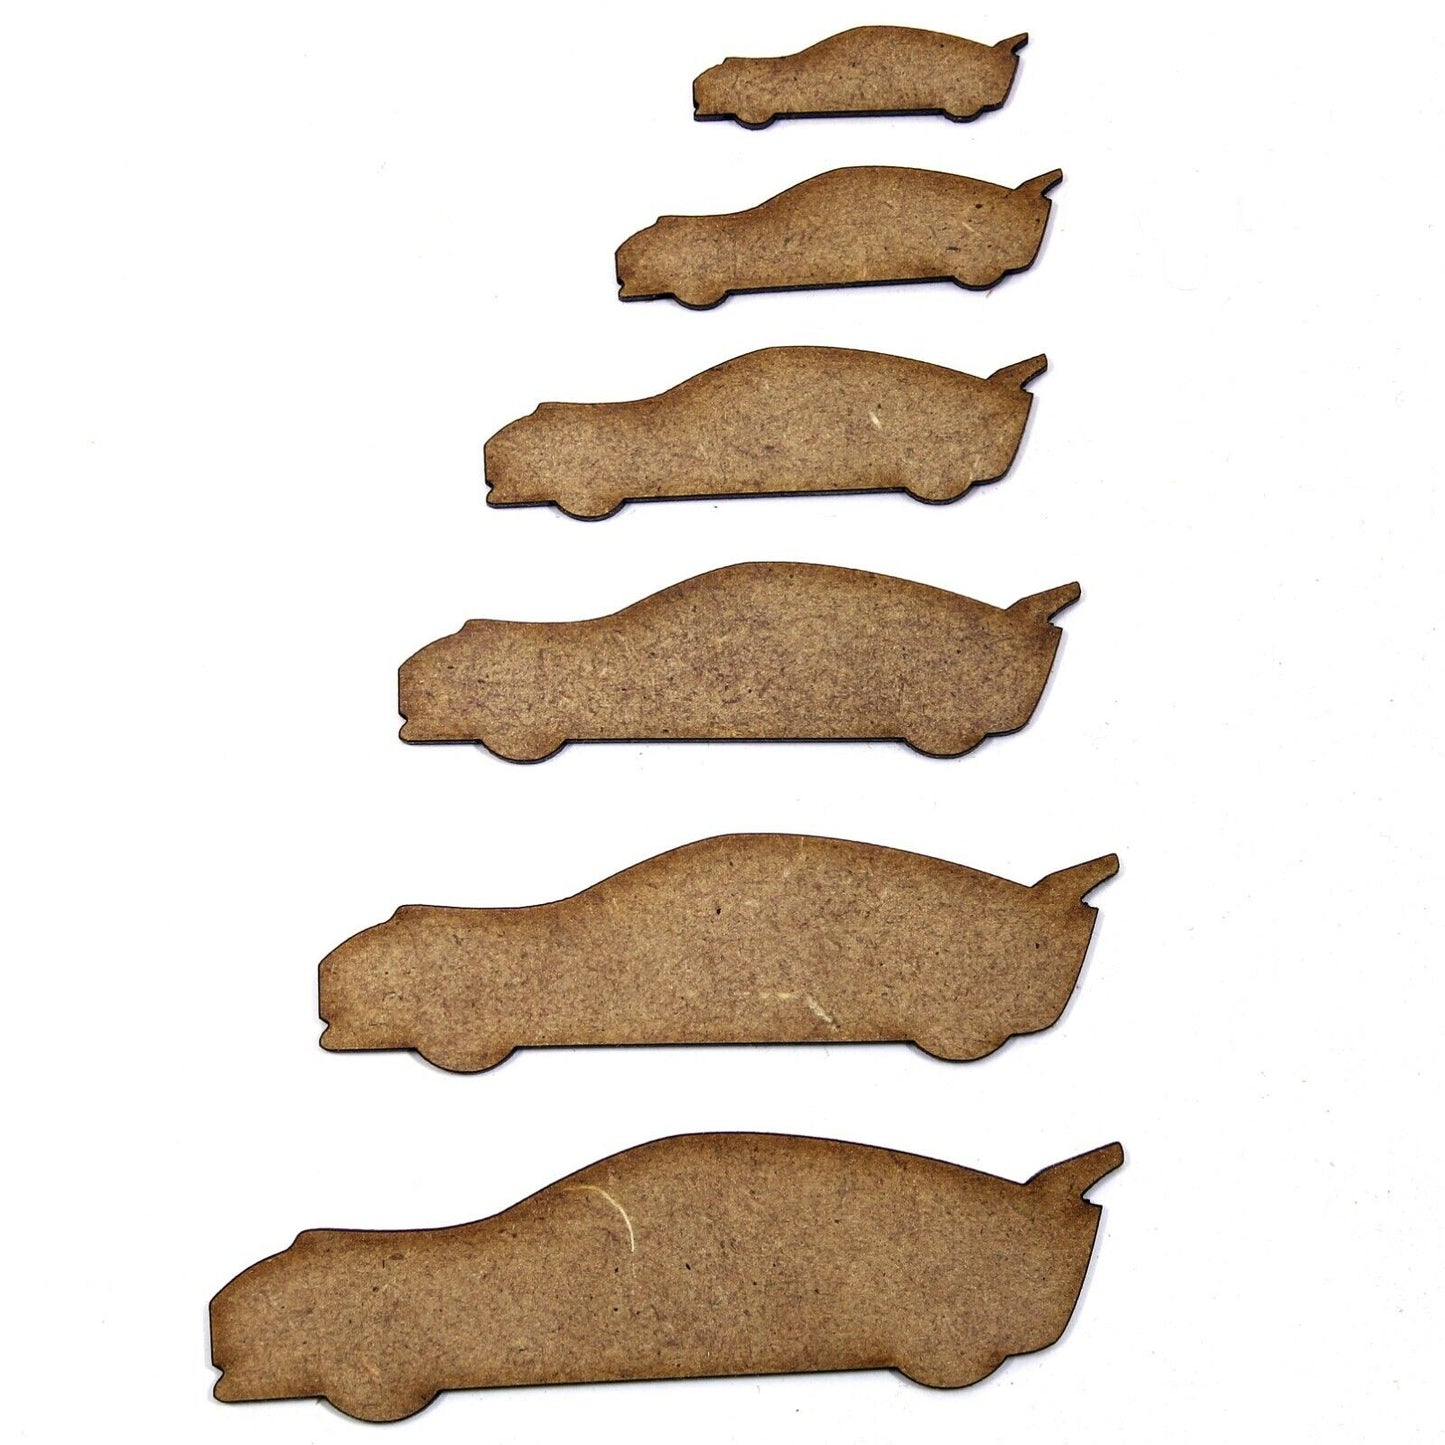 Race Car Craft Shape, Various Sizes, 2mm MDF Wood. Rally, Racing, Driving